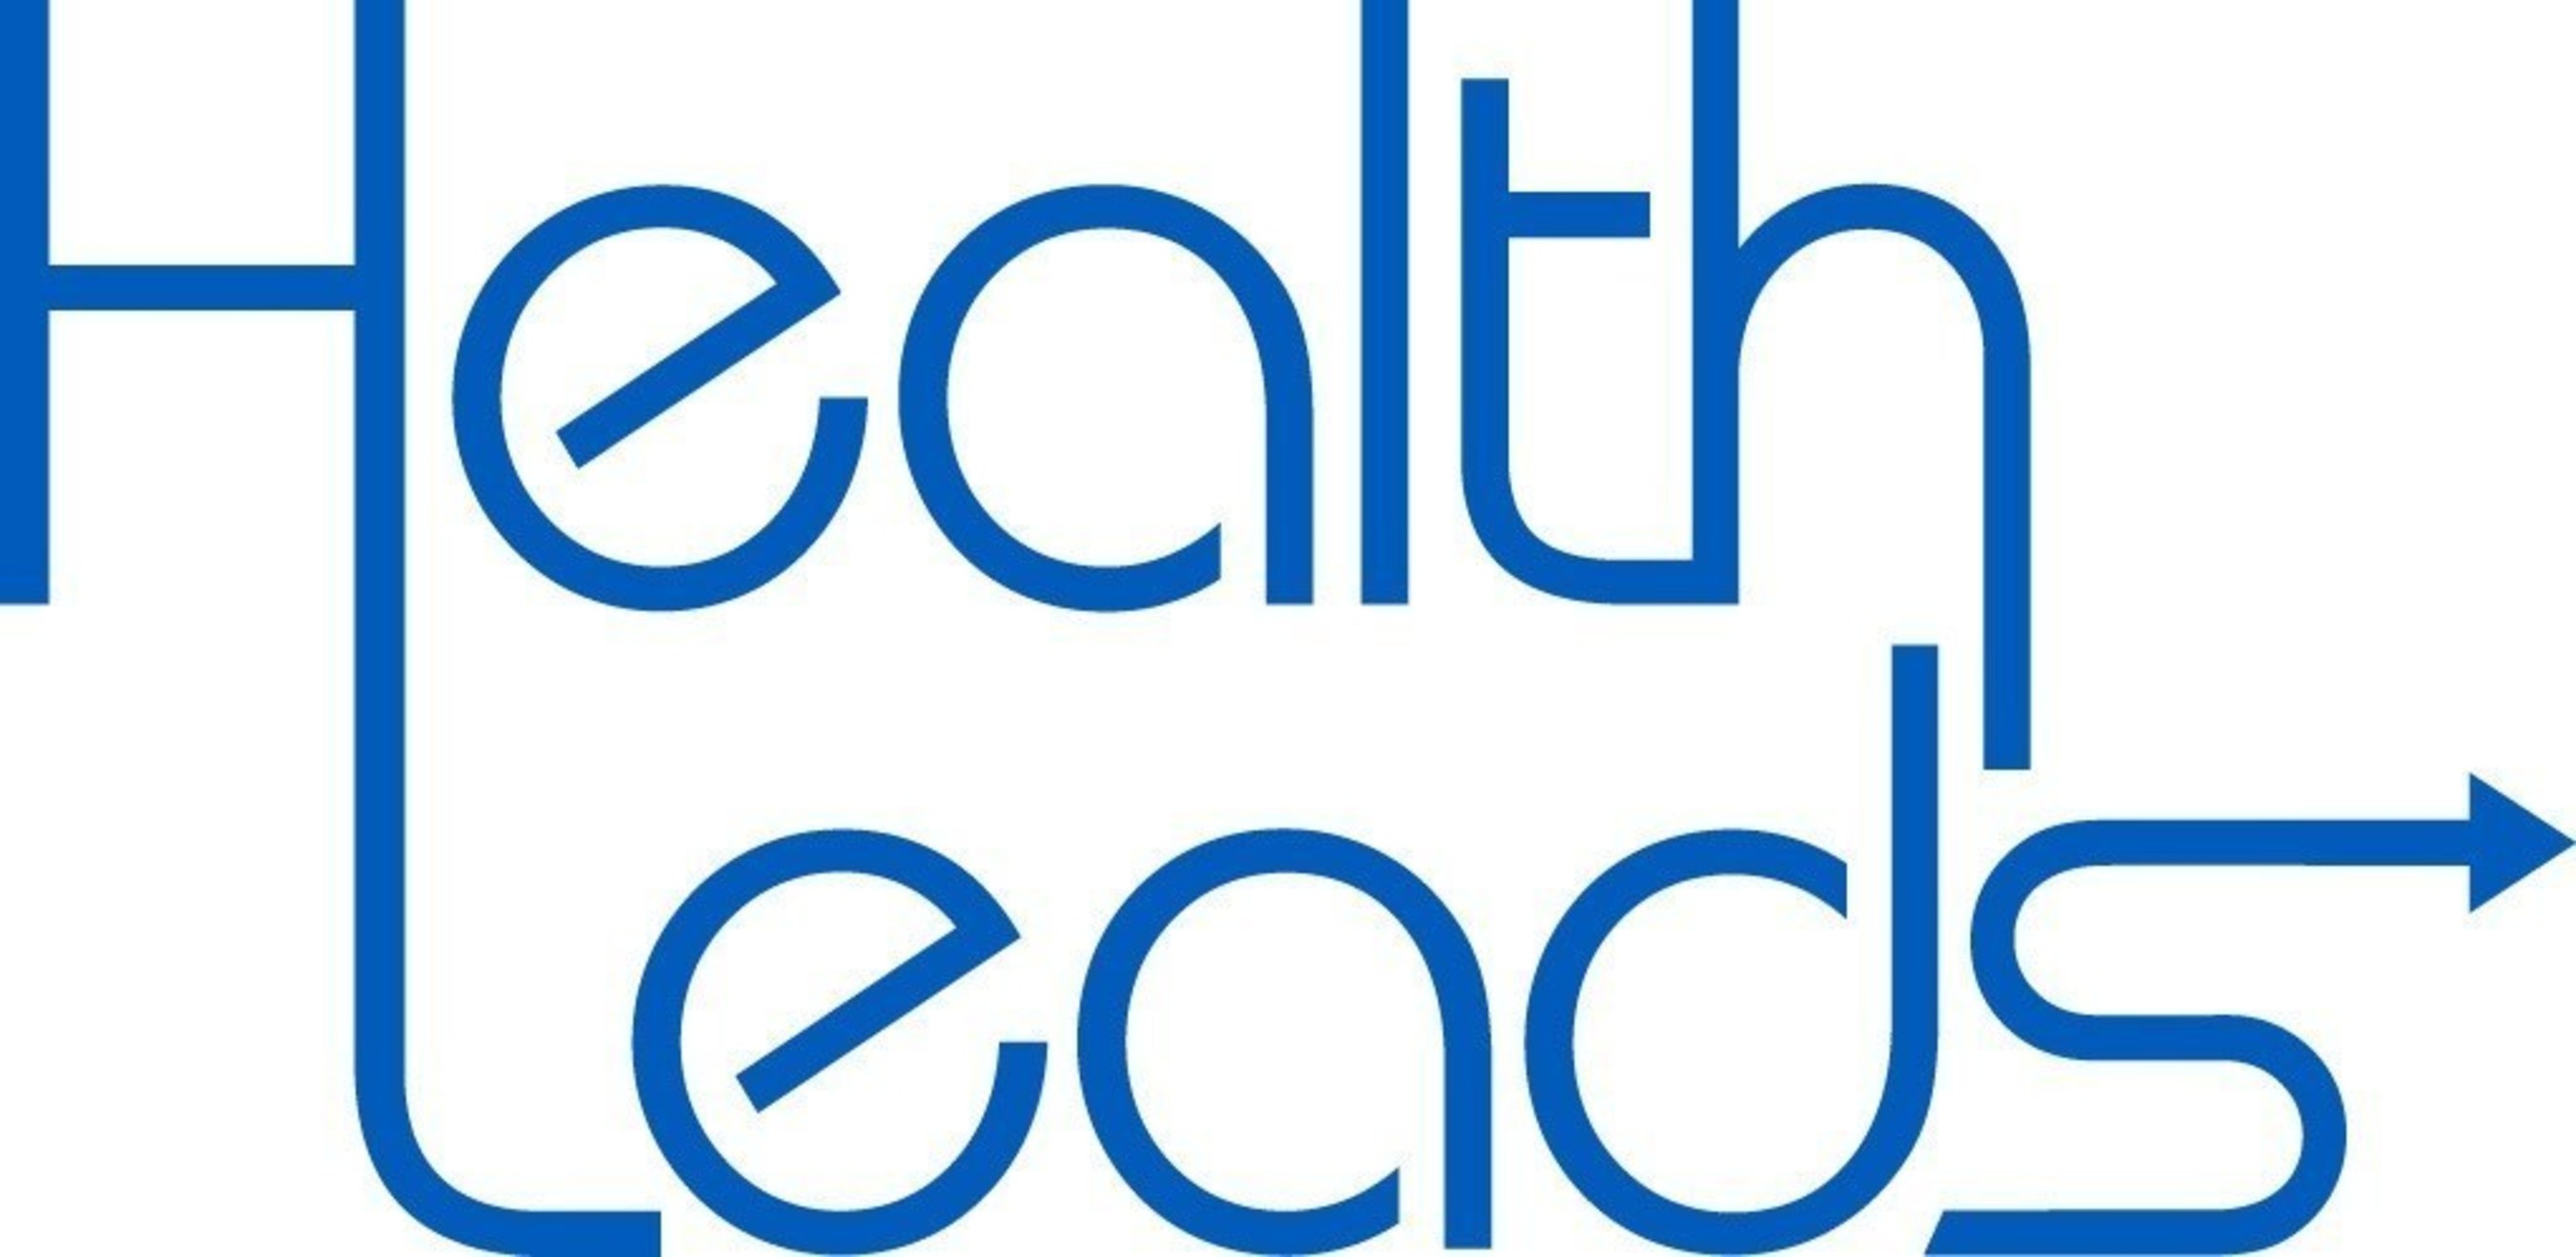 Health Leads is a social enterprise that envisions a healthcare system that addresses all patients' basic resource needs as a standard part of quality care.